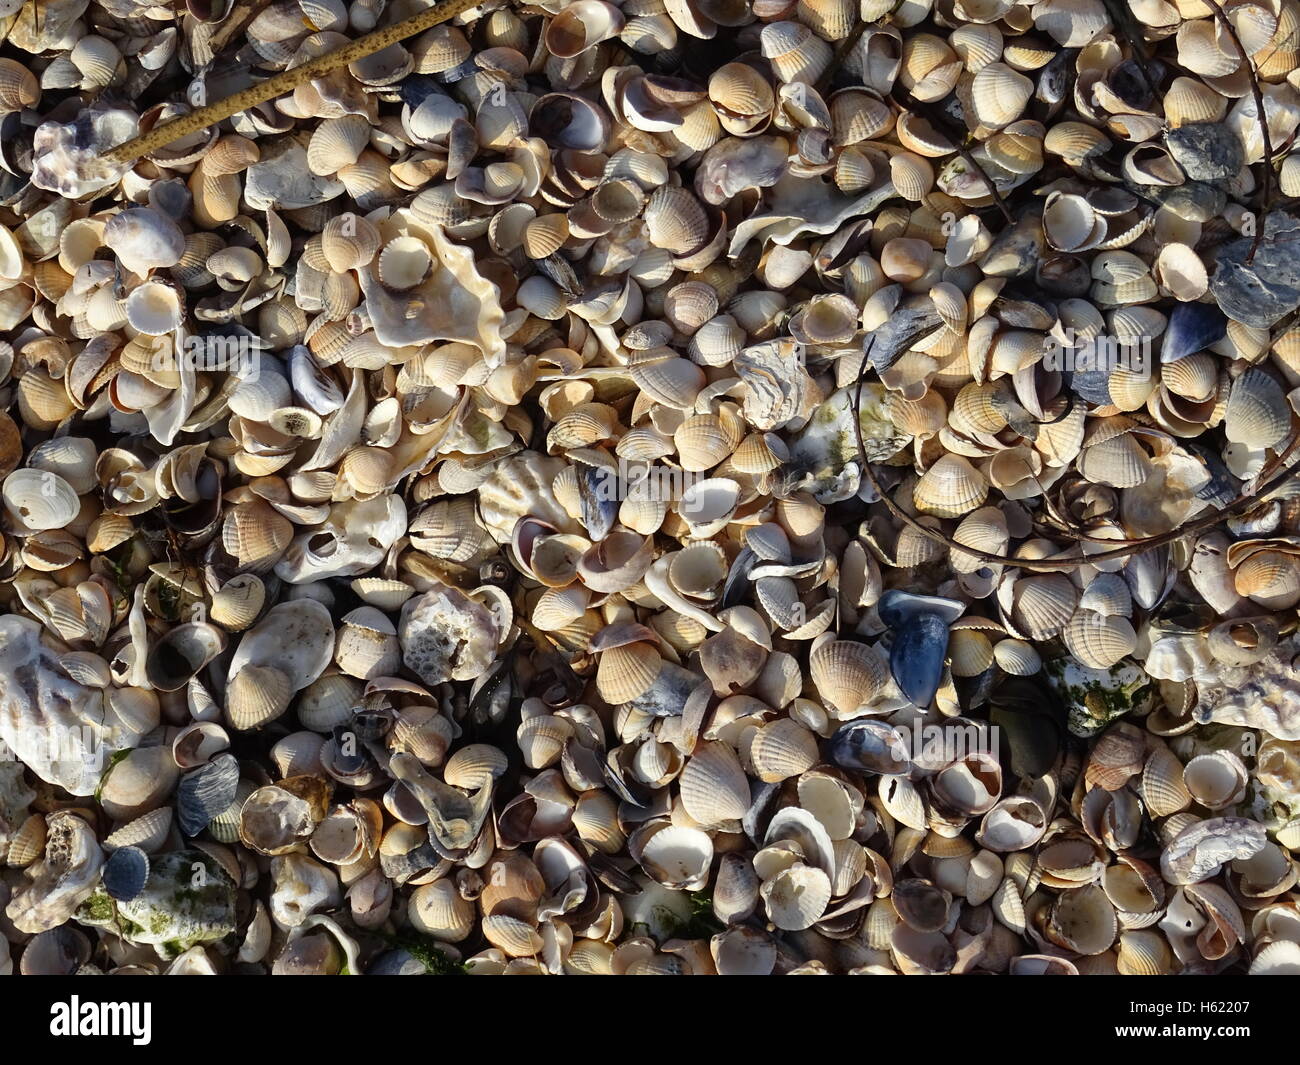 Shells as washed up on a beach Stock Photo